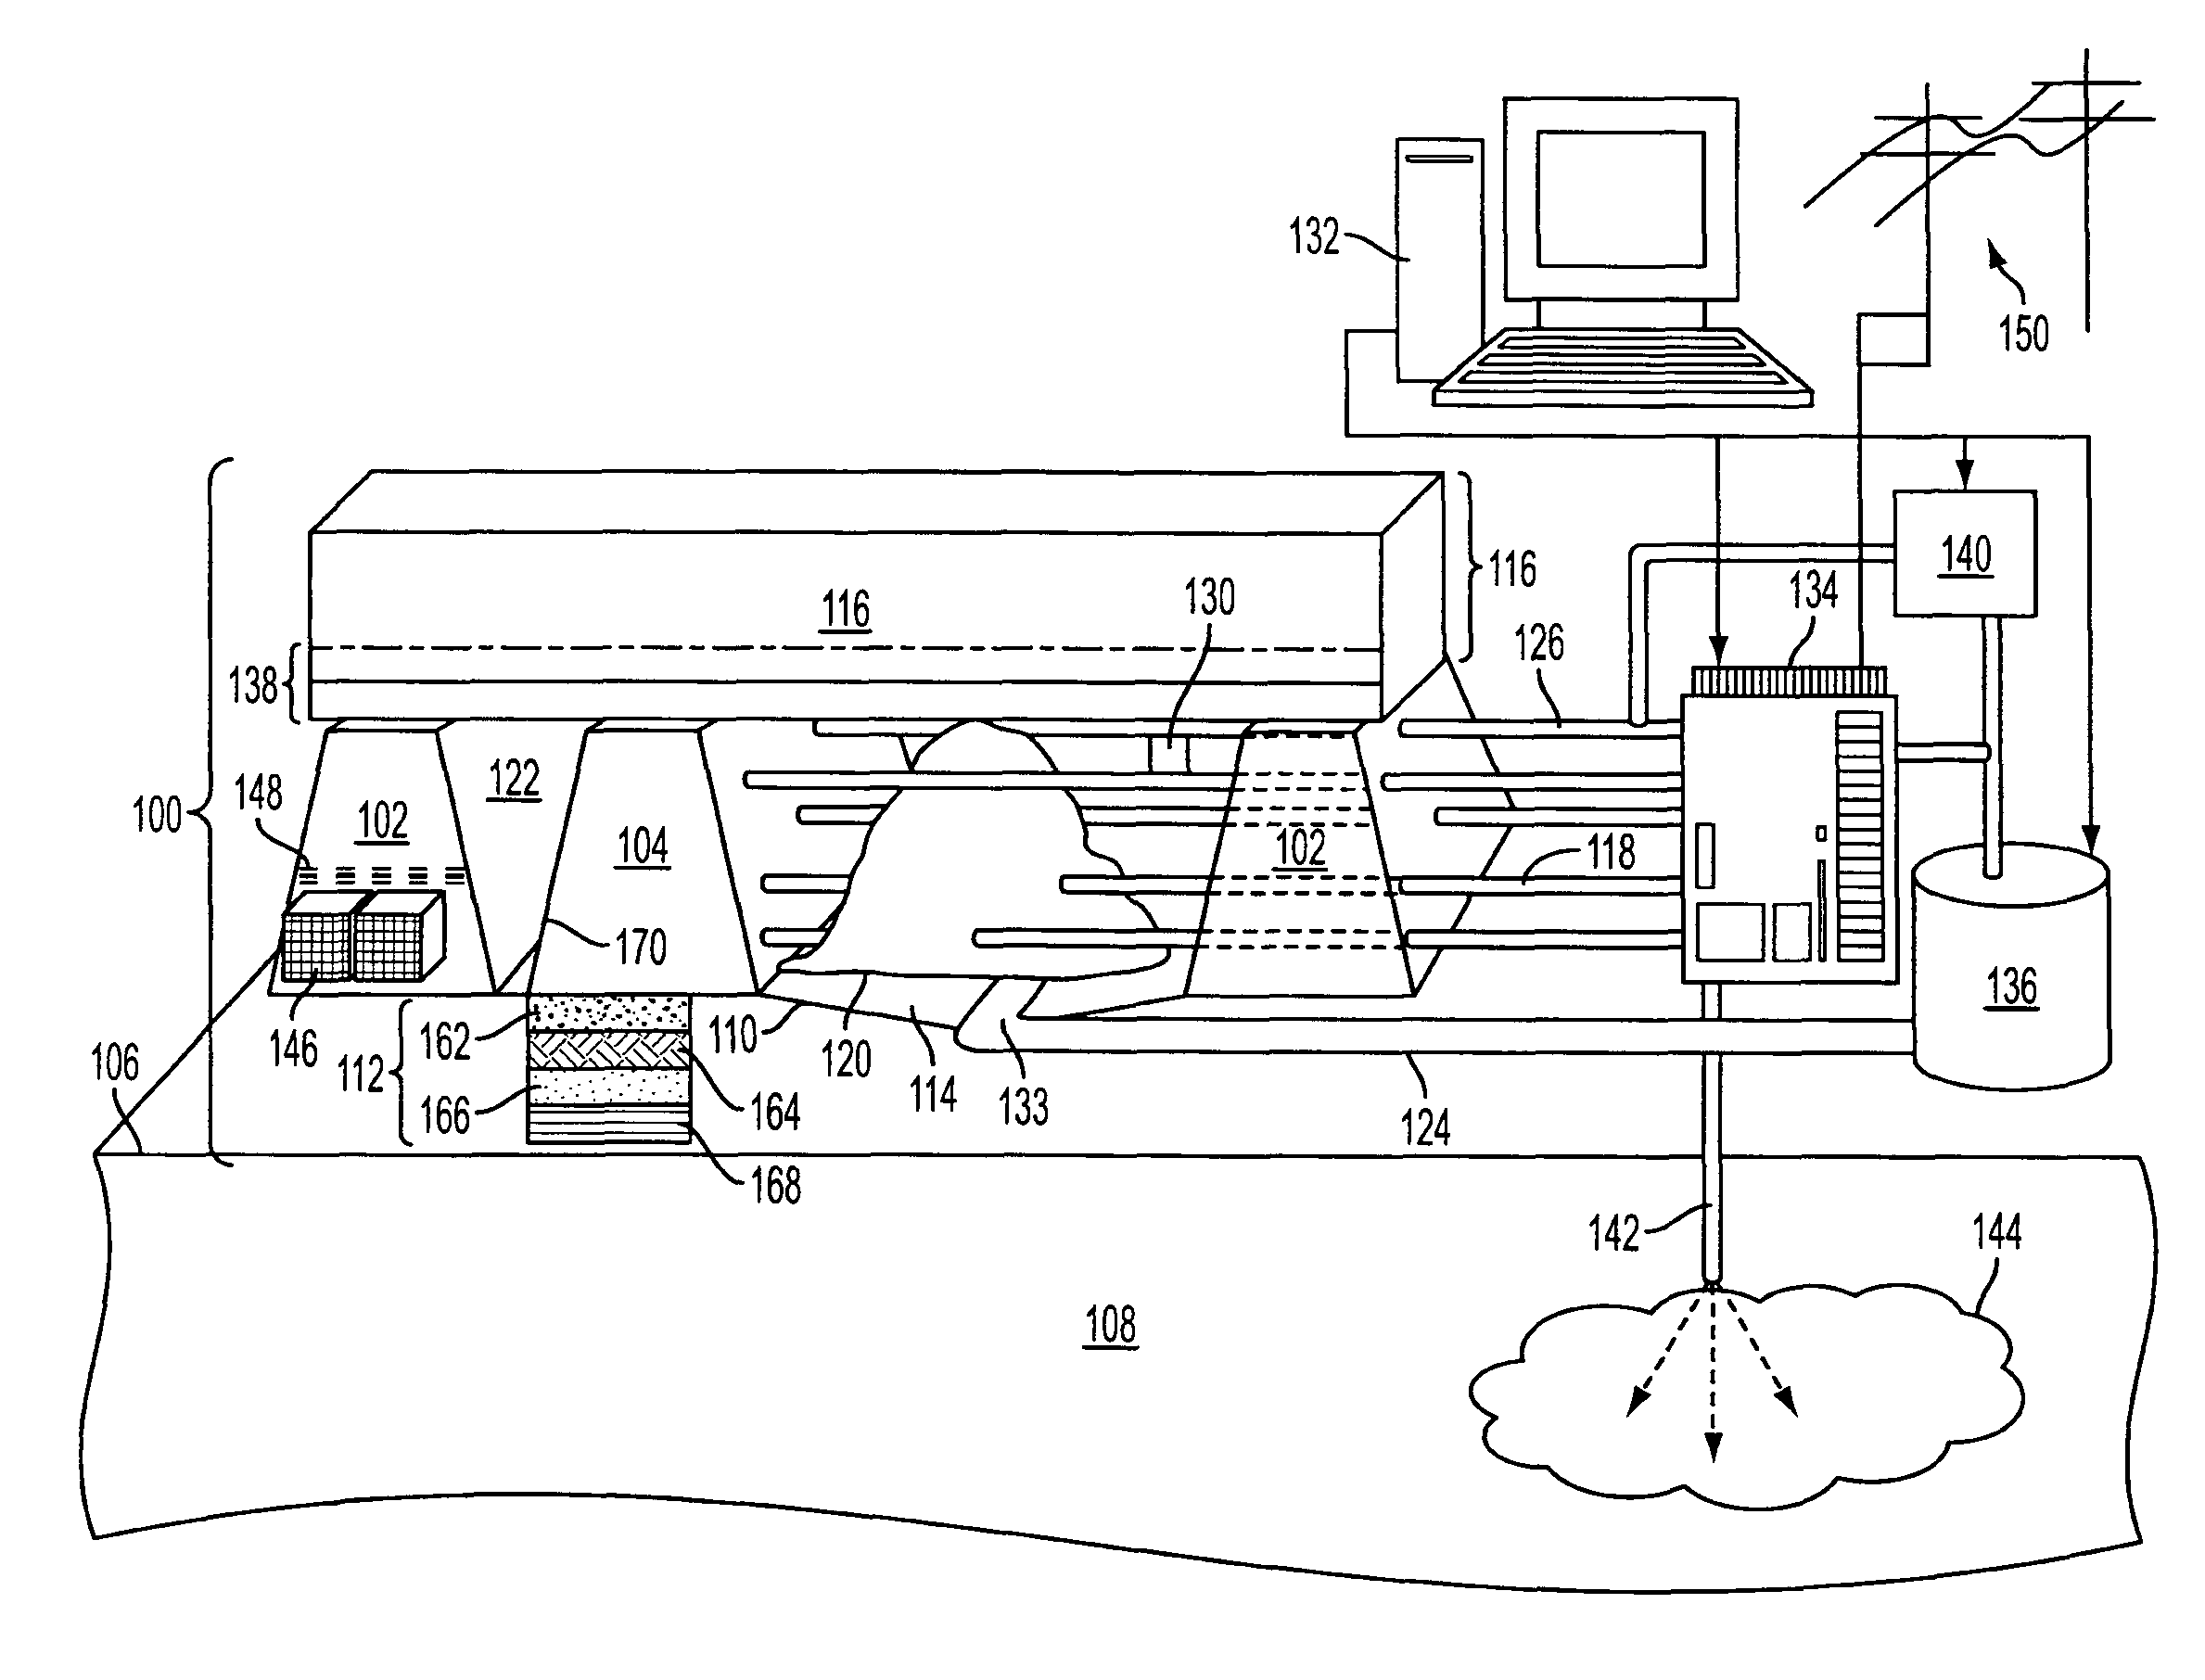 Methods of recovering hydrocarbons from hydrocarbonaceous material using a constructed infrastructure and associated systems